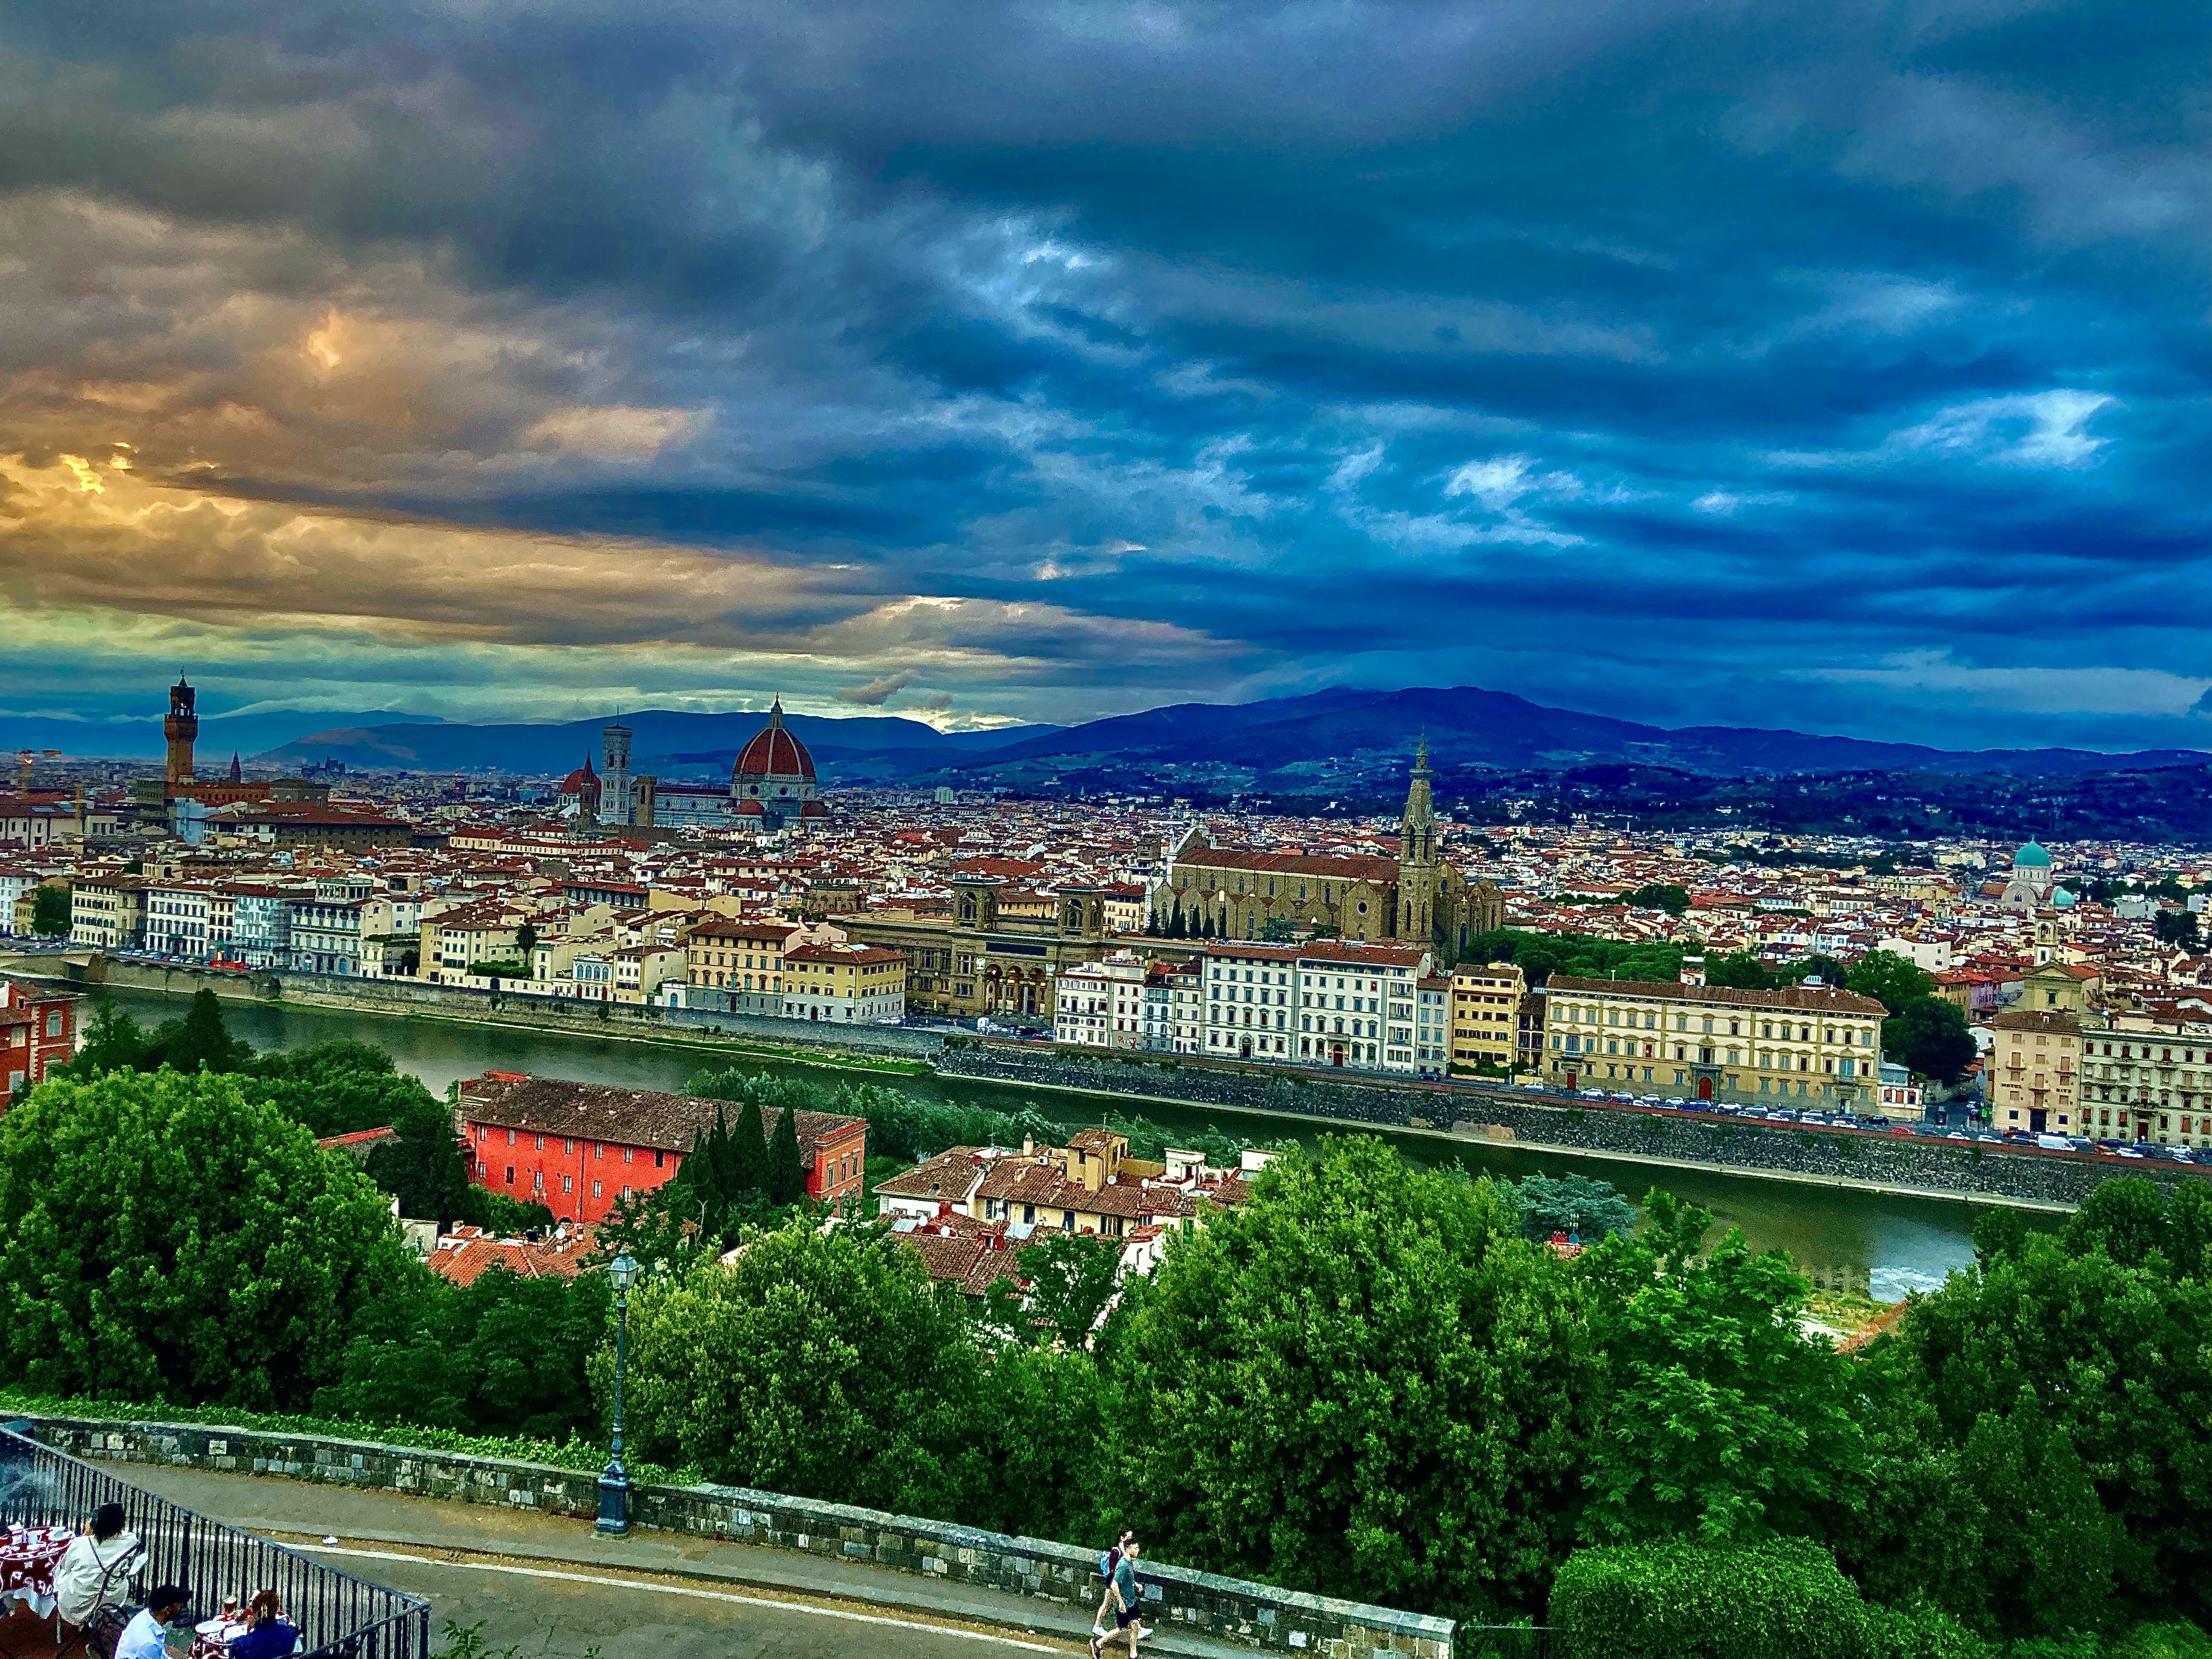 A view of a sunset over Florence, Italy from a high lookout.